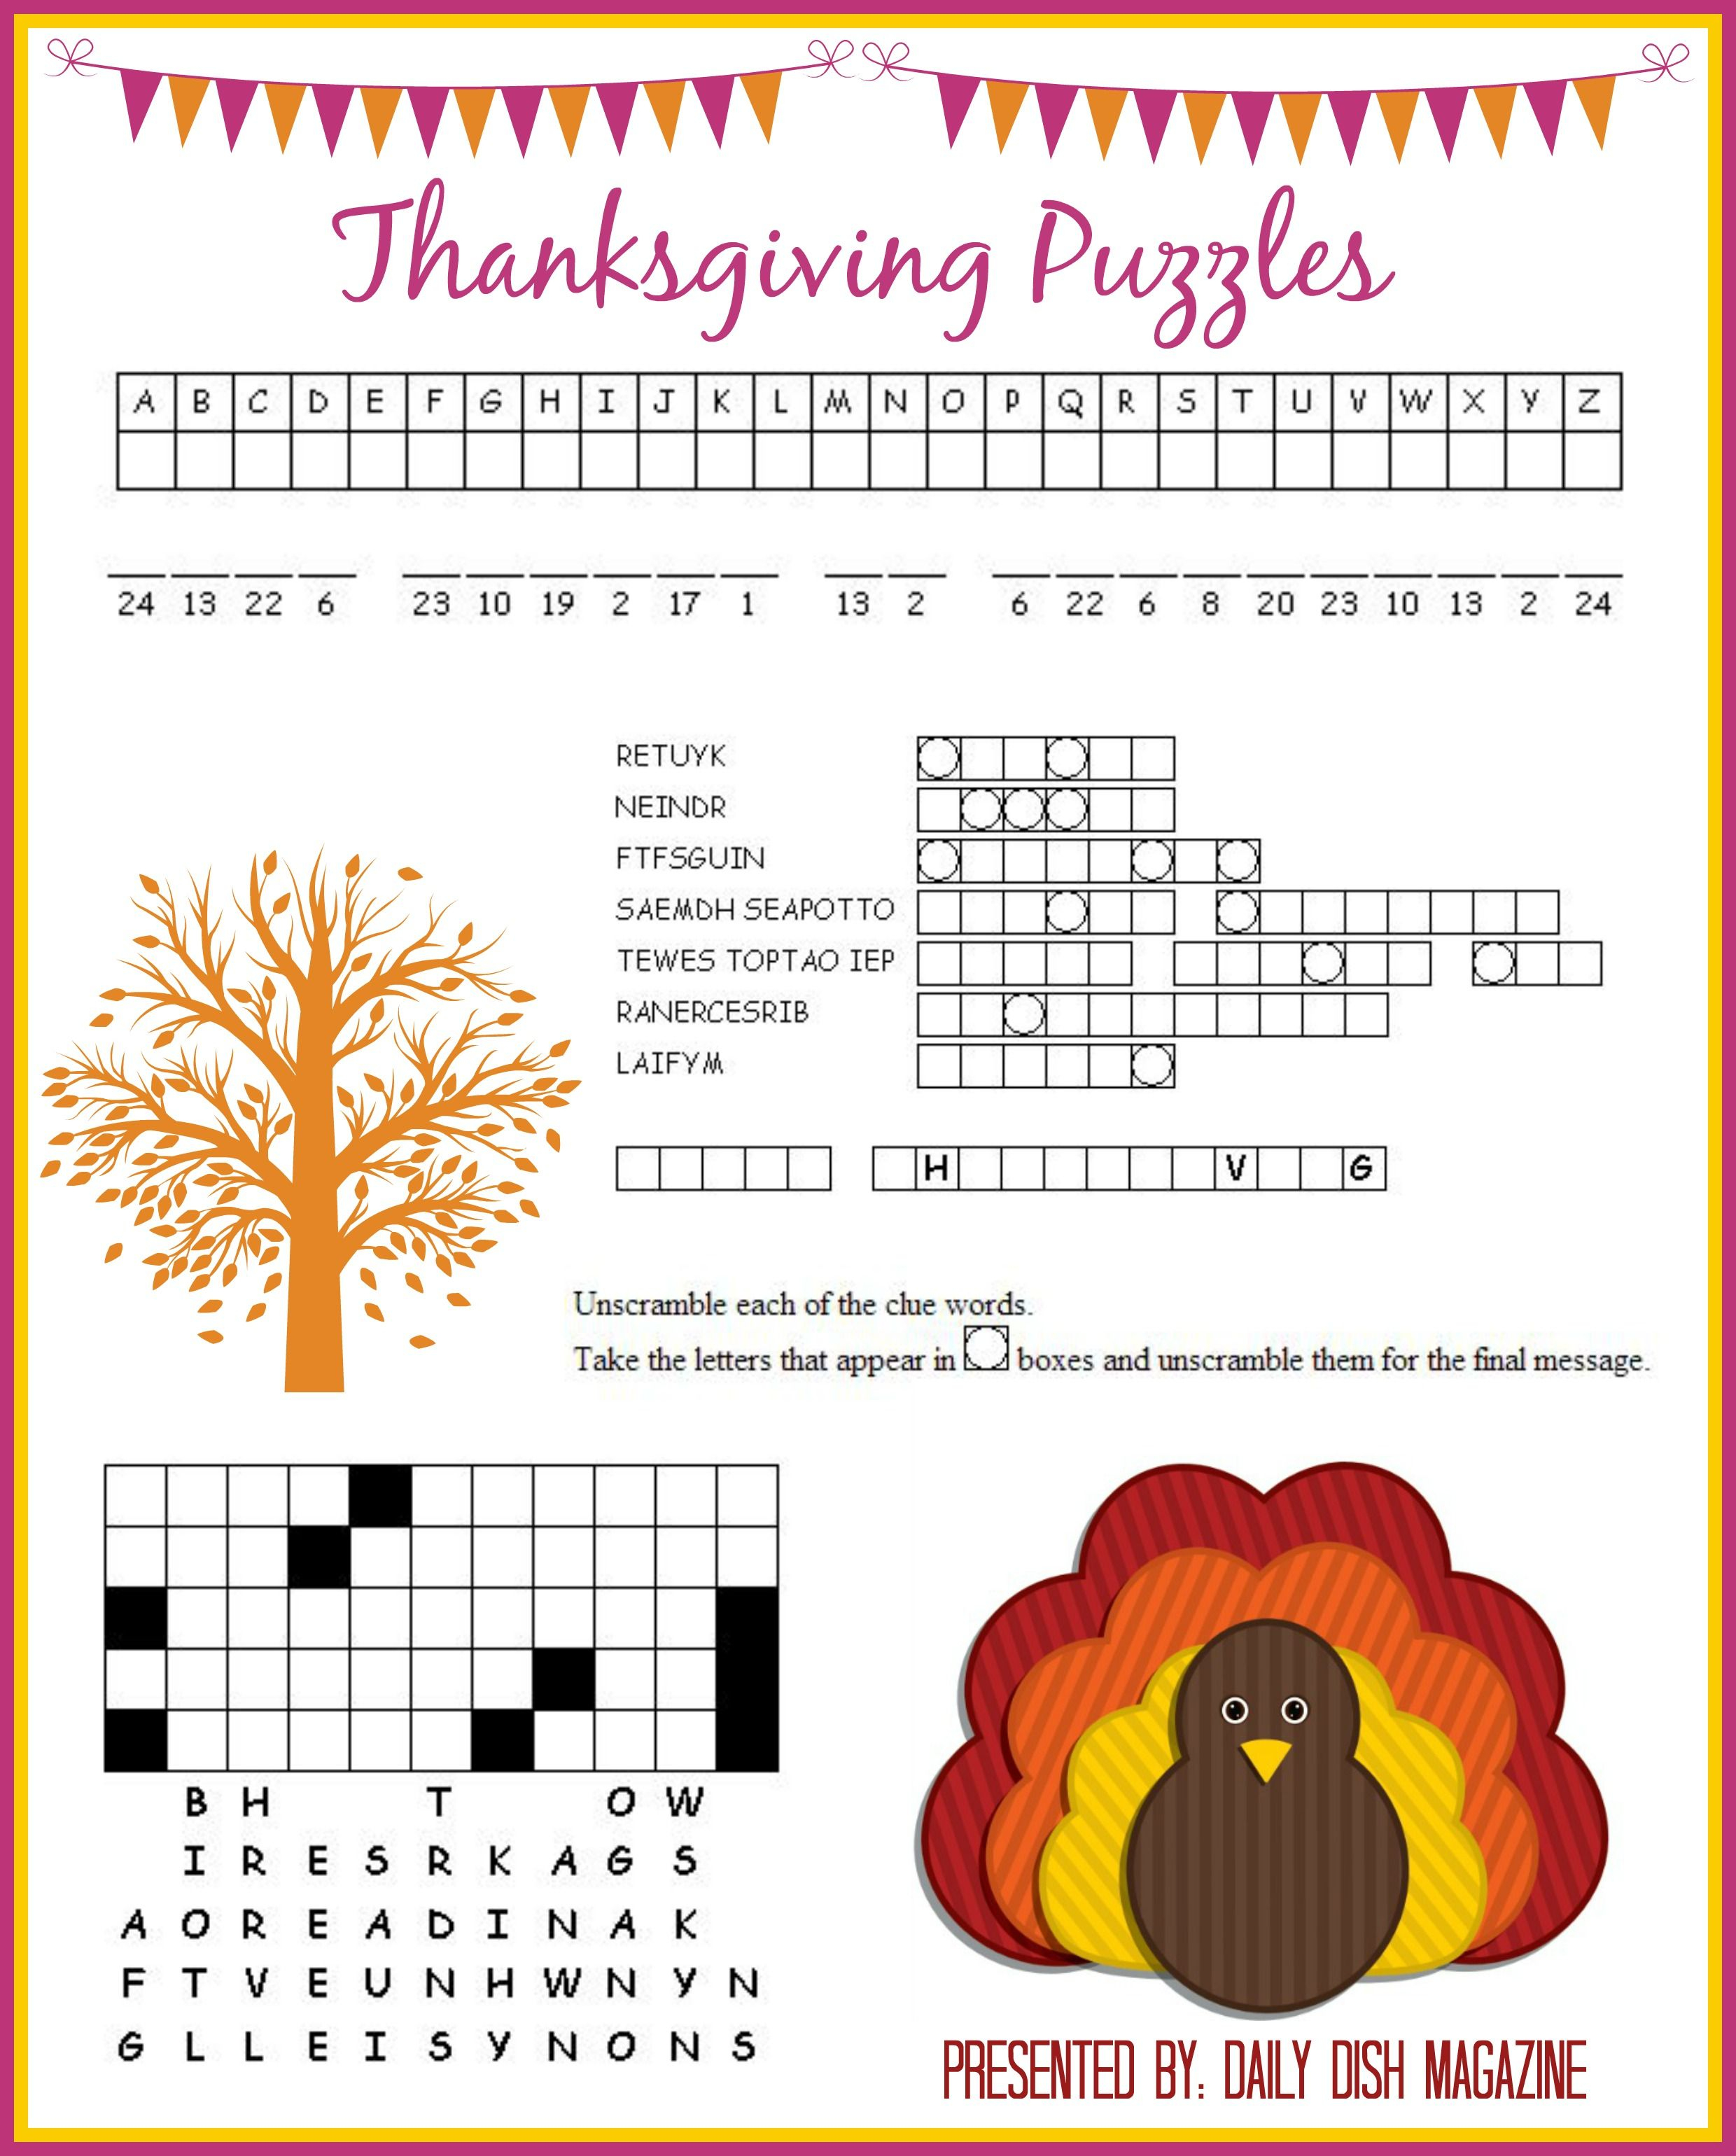 Thanksgiving Puzzles Printables | *holidays We Celebrate - Printable Thanksgiving Puzzle